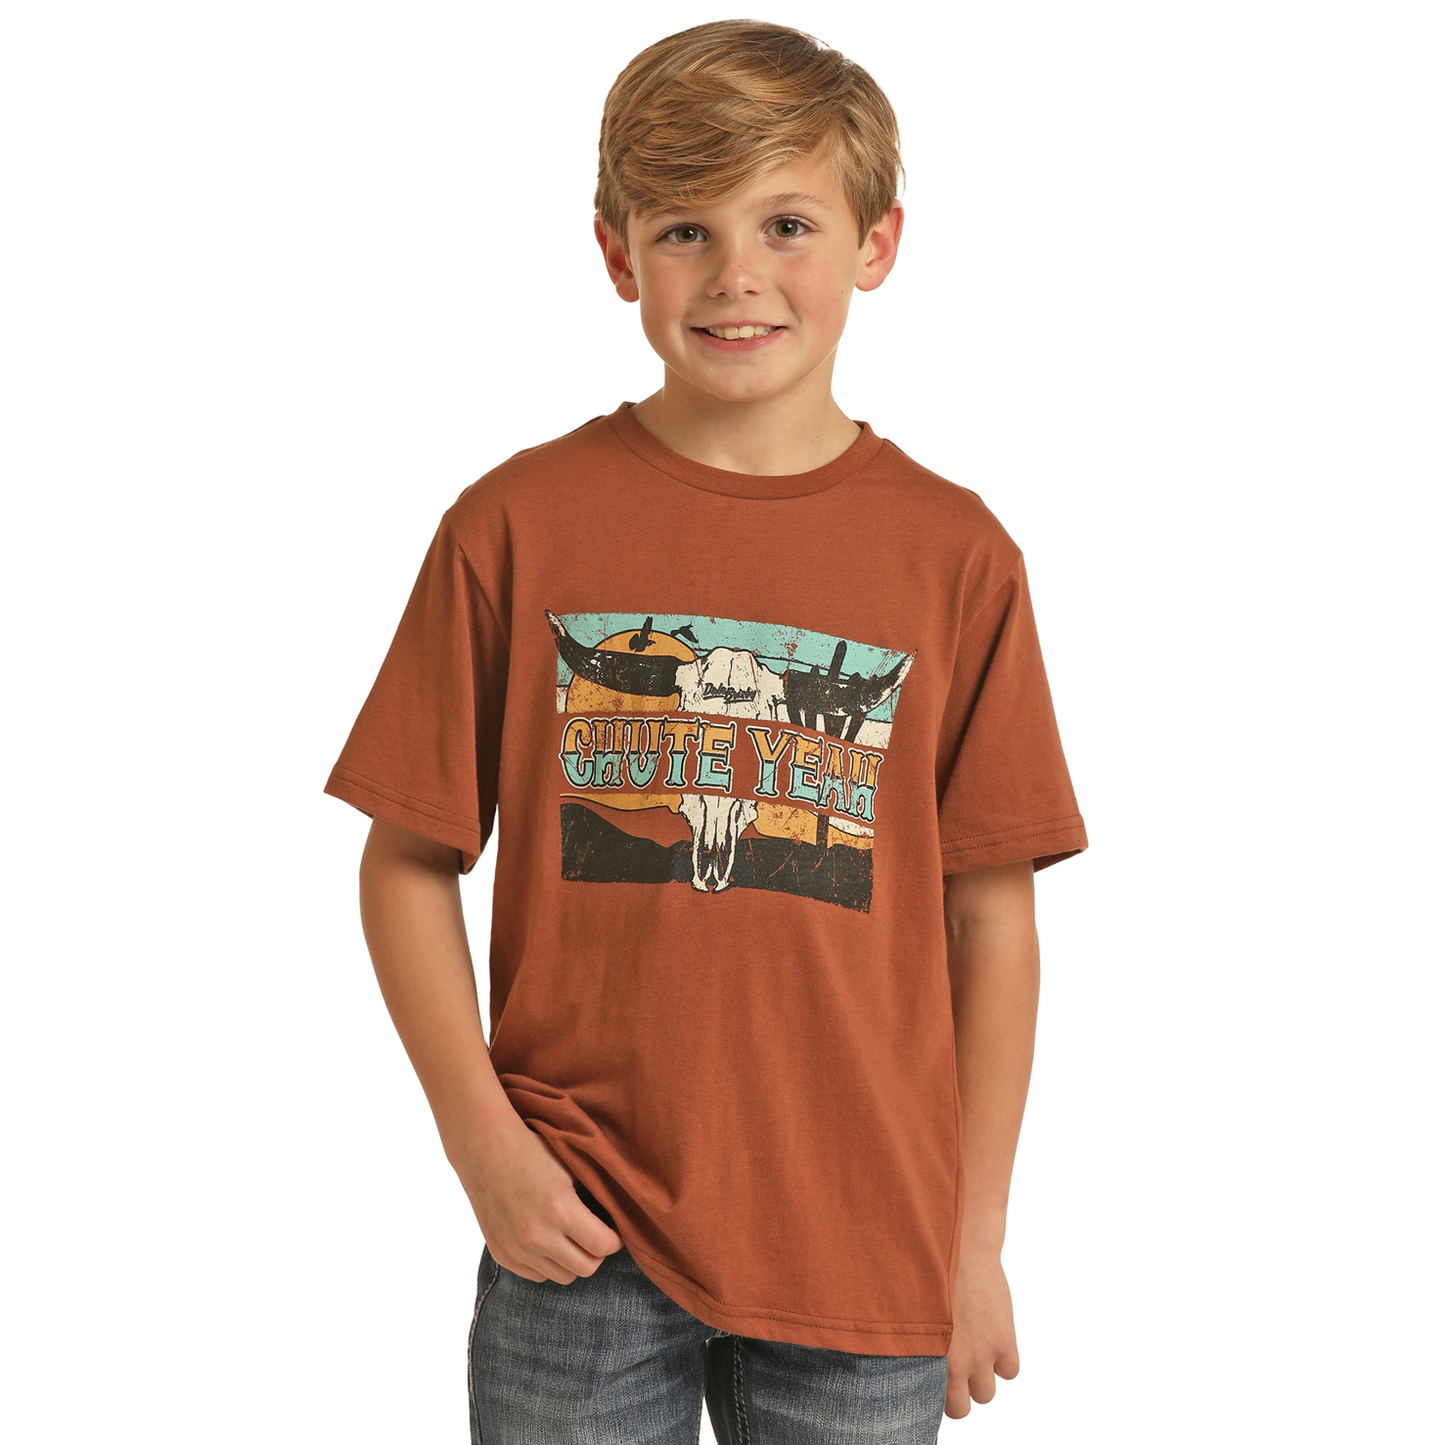 Rock & Roll® Youth Boy's "Chute Yeah" Graphic T-Shirt RRBT21R06A-90